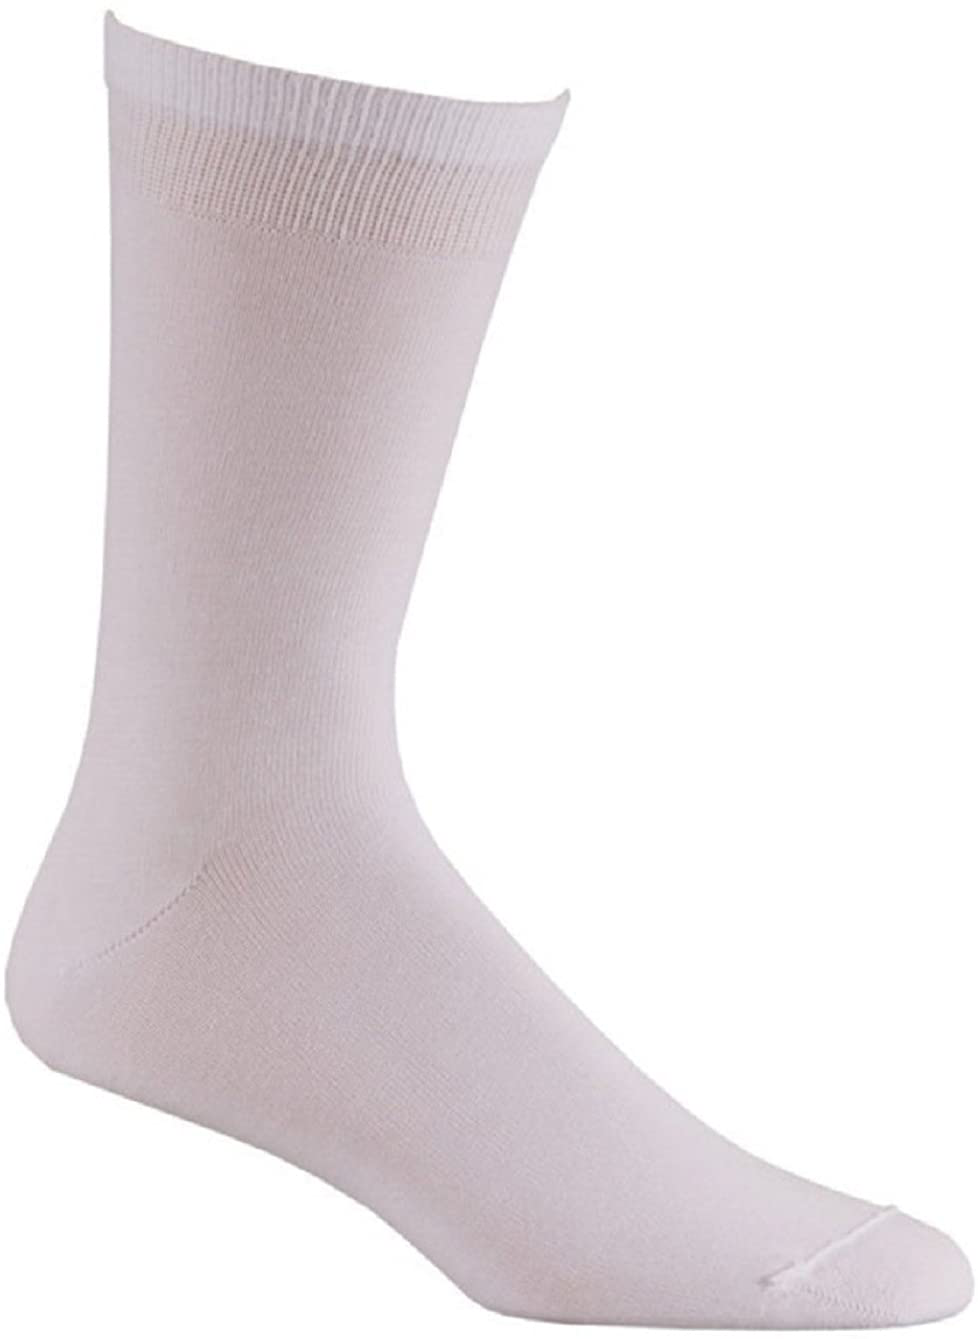 FoxRiver mens Wick Dry Therm-a-wick Ultra-lightweight Liner Crew Socks